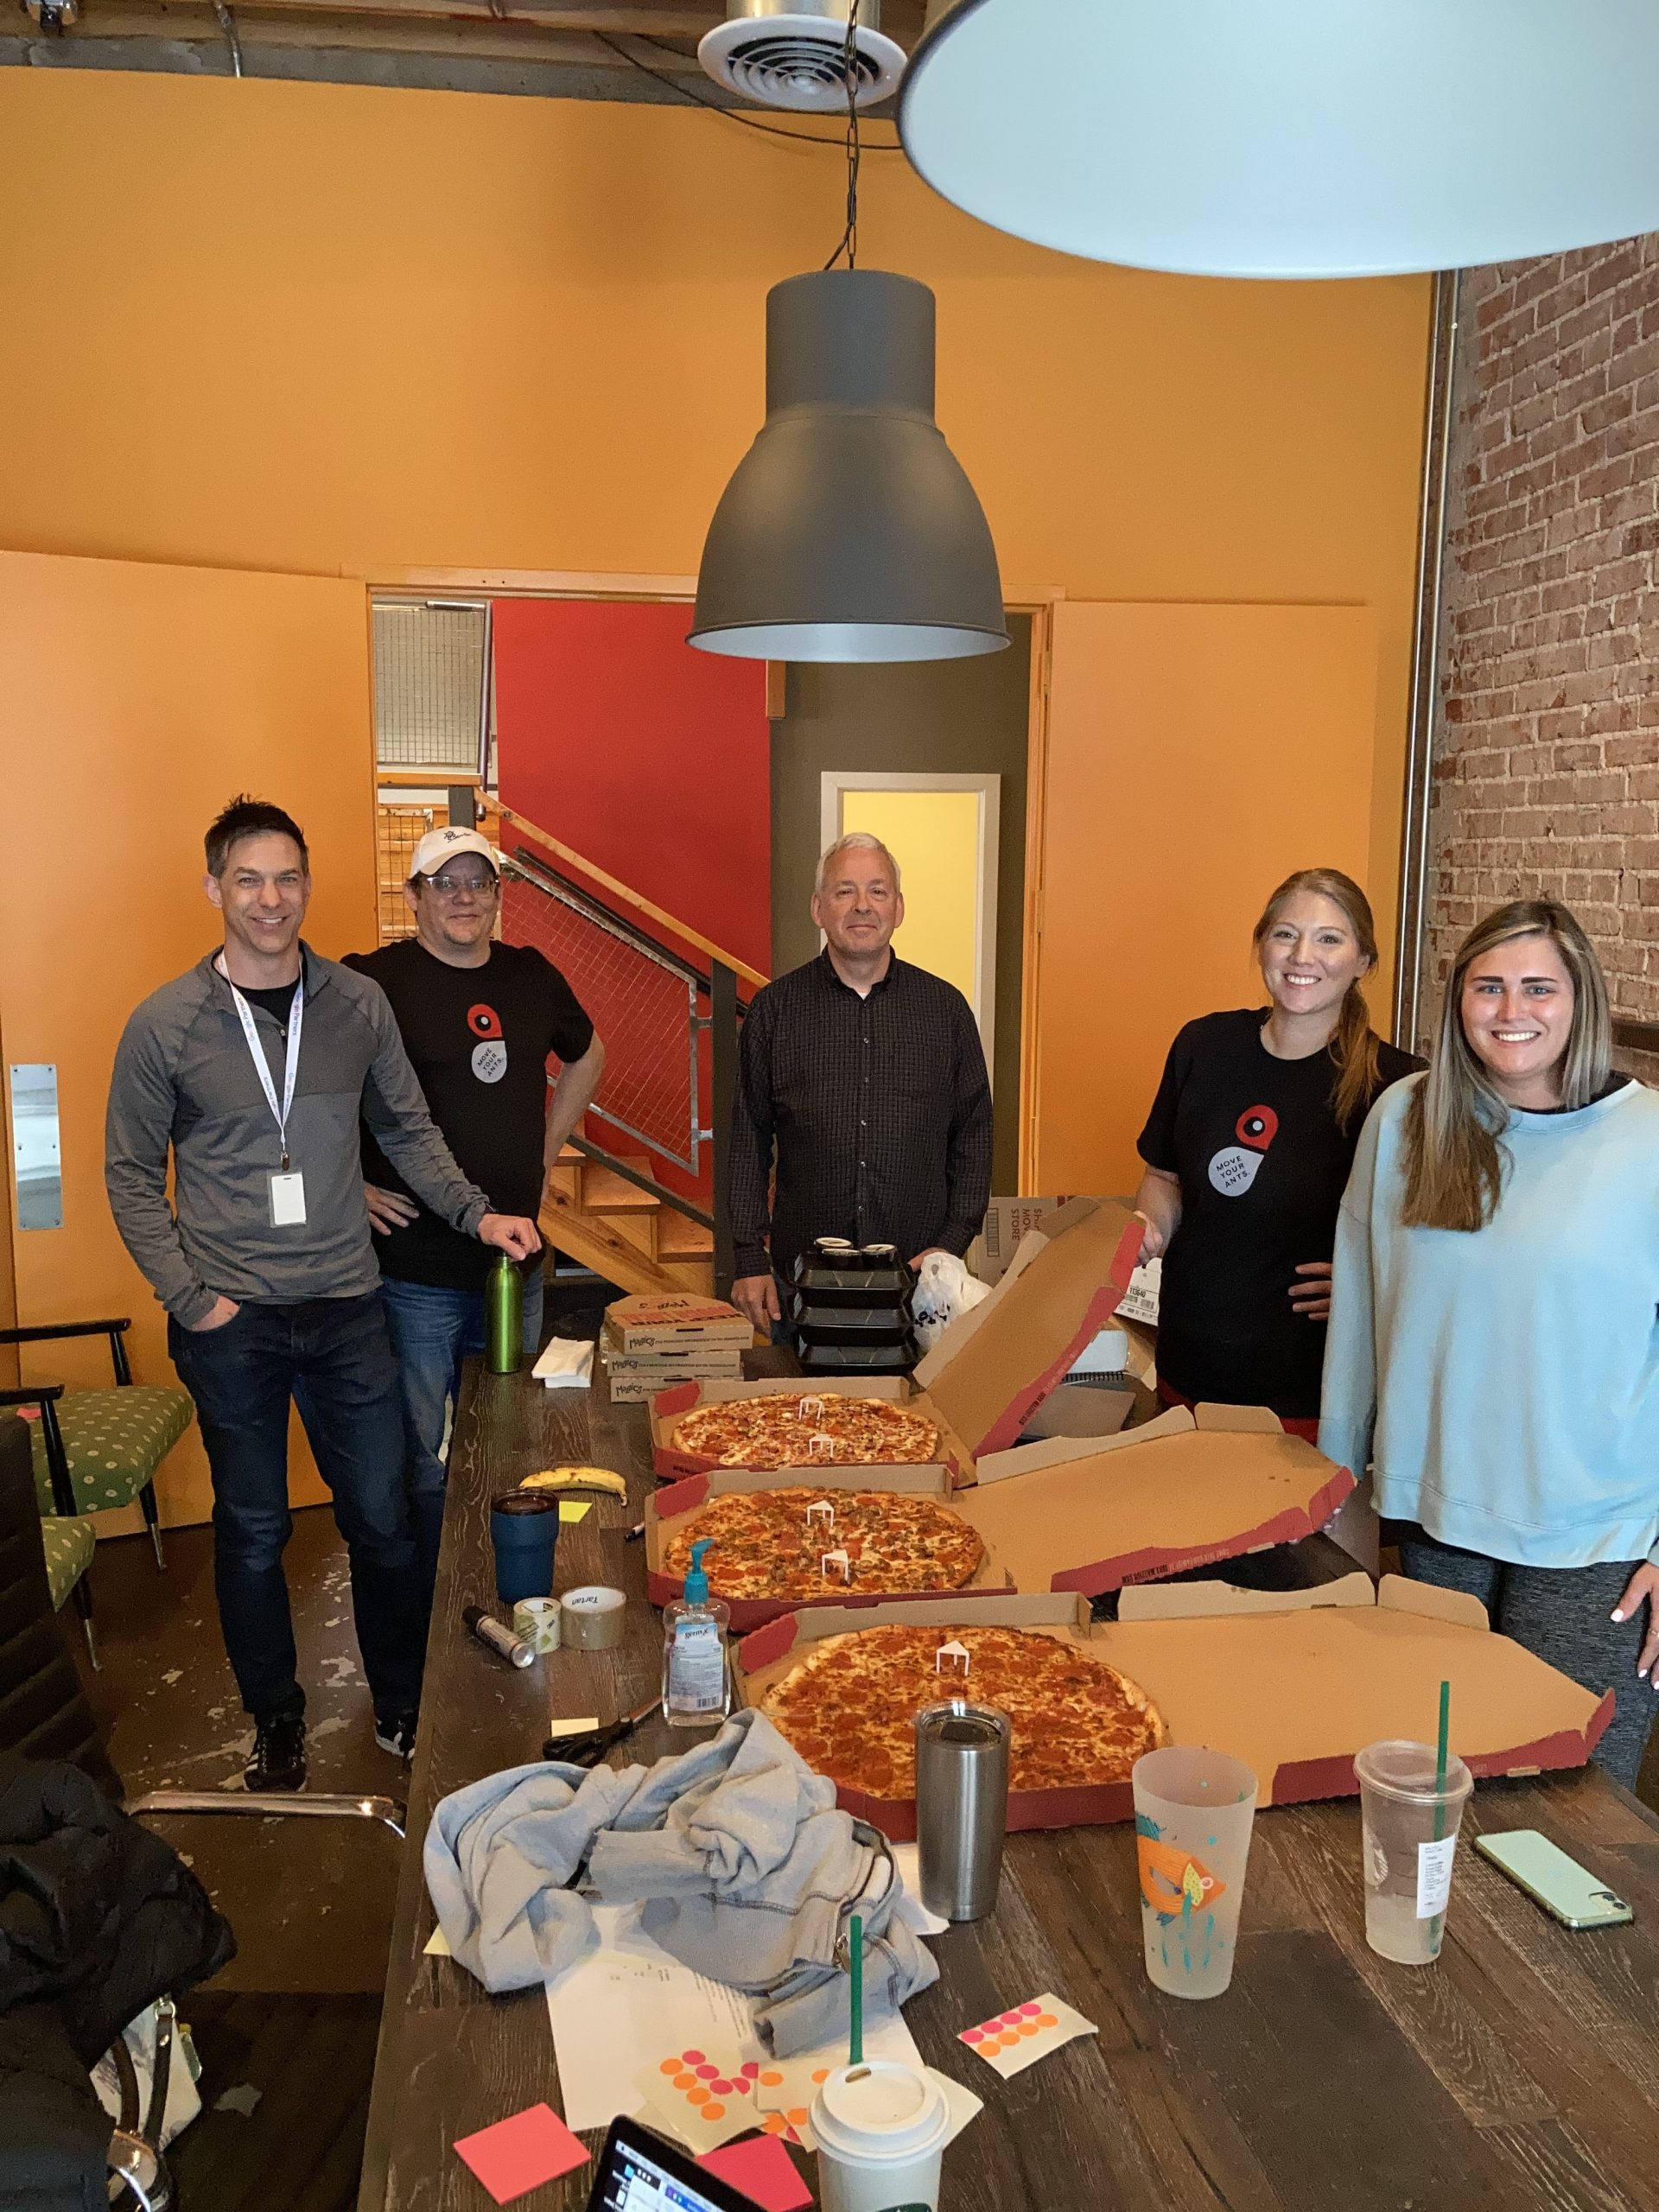 Group of people smiling around a table of pizza boxes.